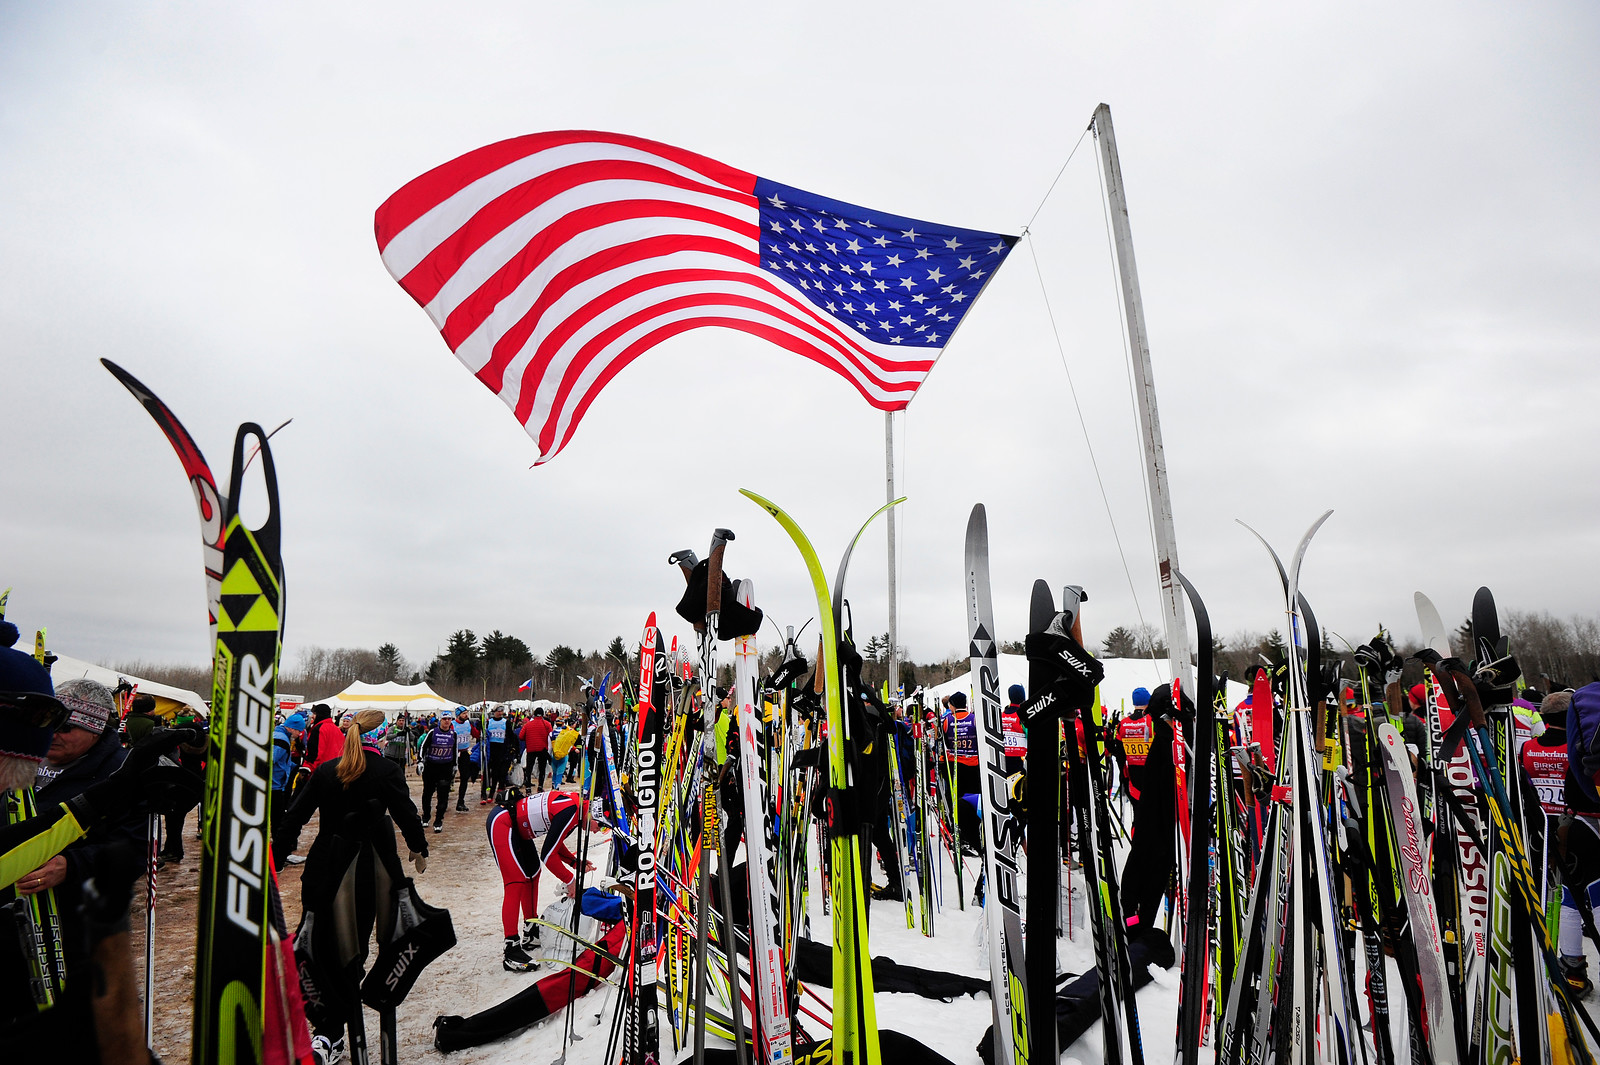 Ski racing in America: still packed and enthusiastic, even when it's 32 degrees and raining. (Photo: USSA/Tom Kelly)